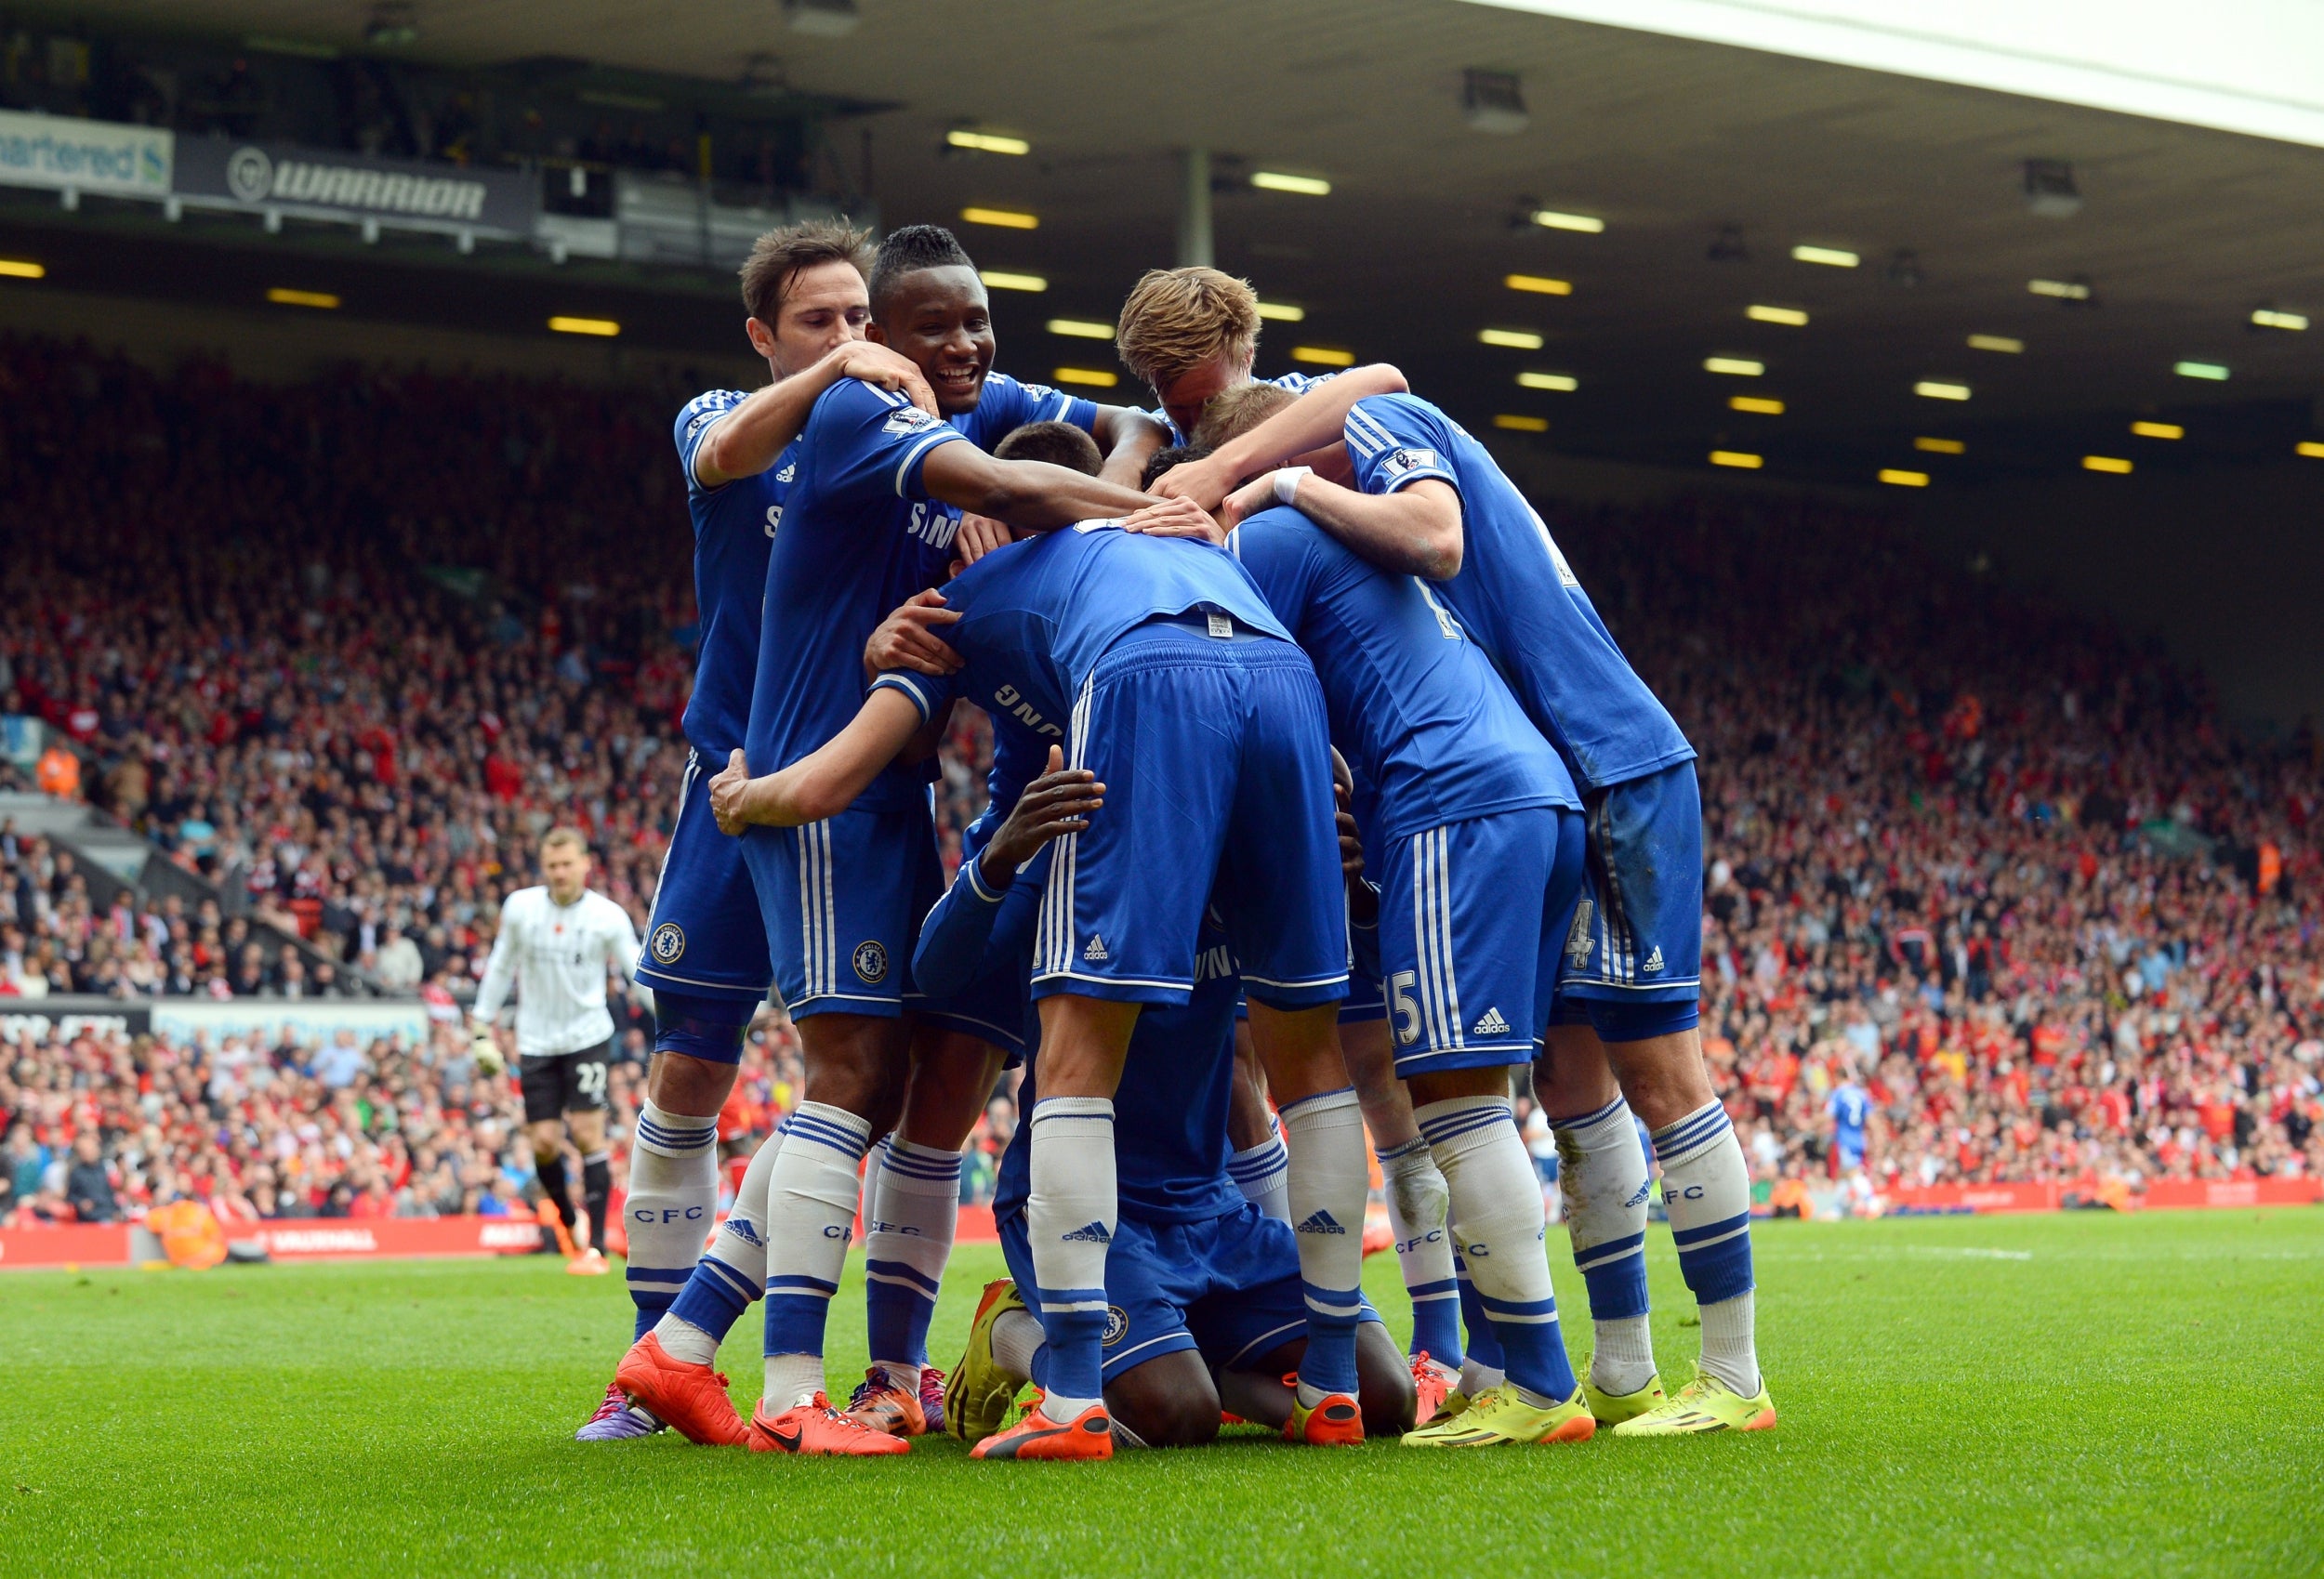 Chelsea stunned Anfield (AFP/Getty Images)